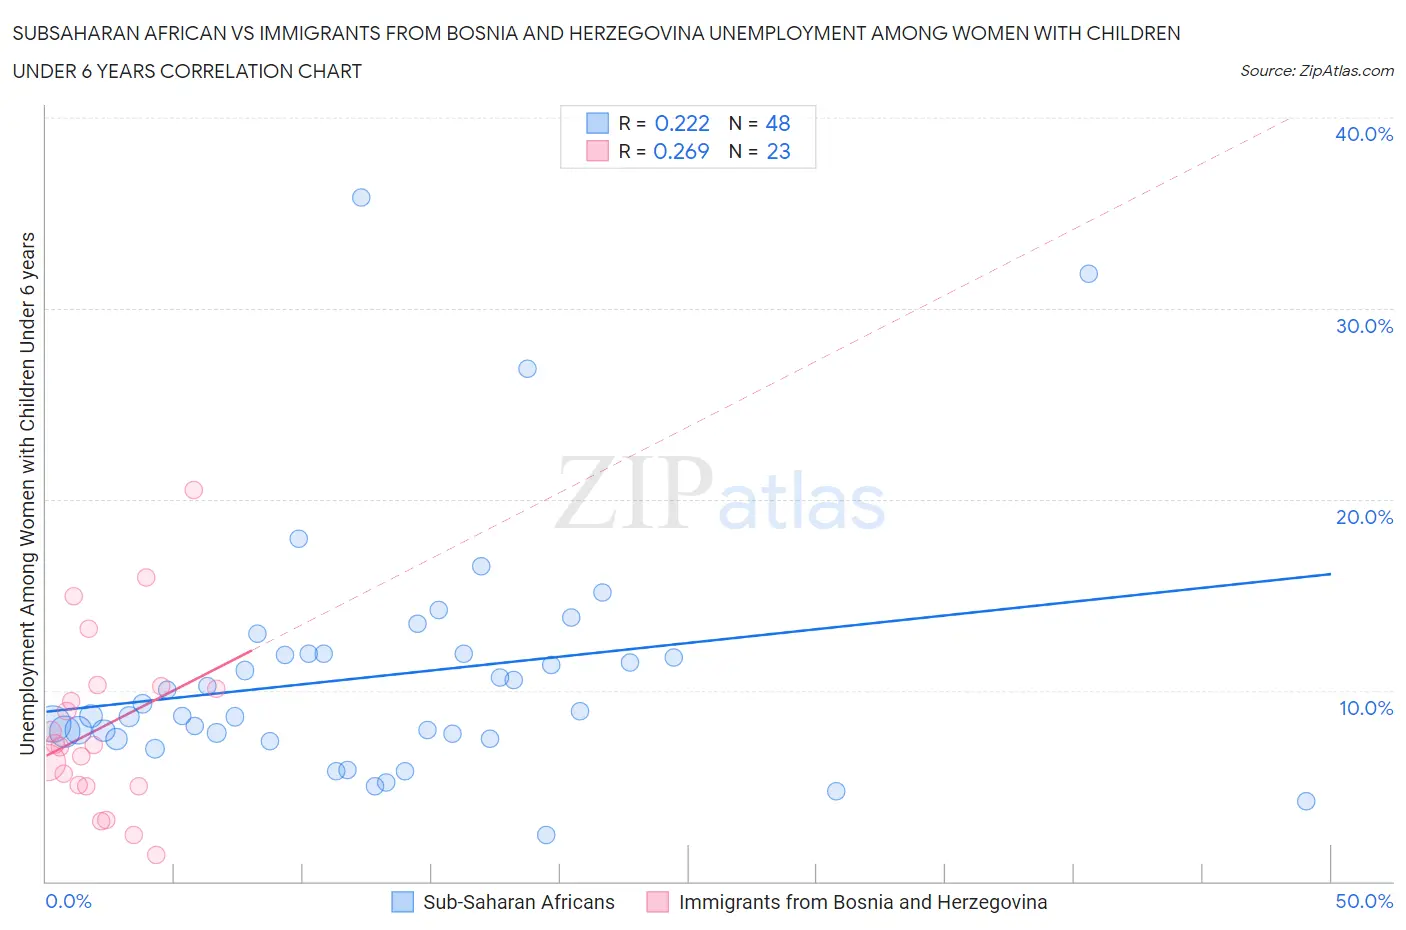 Subsaharan African vs Immigrants from Bosnia and Herzegovina Unemployment Among Women with Children Under 6 years